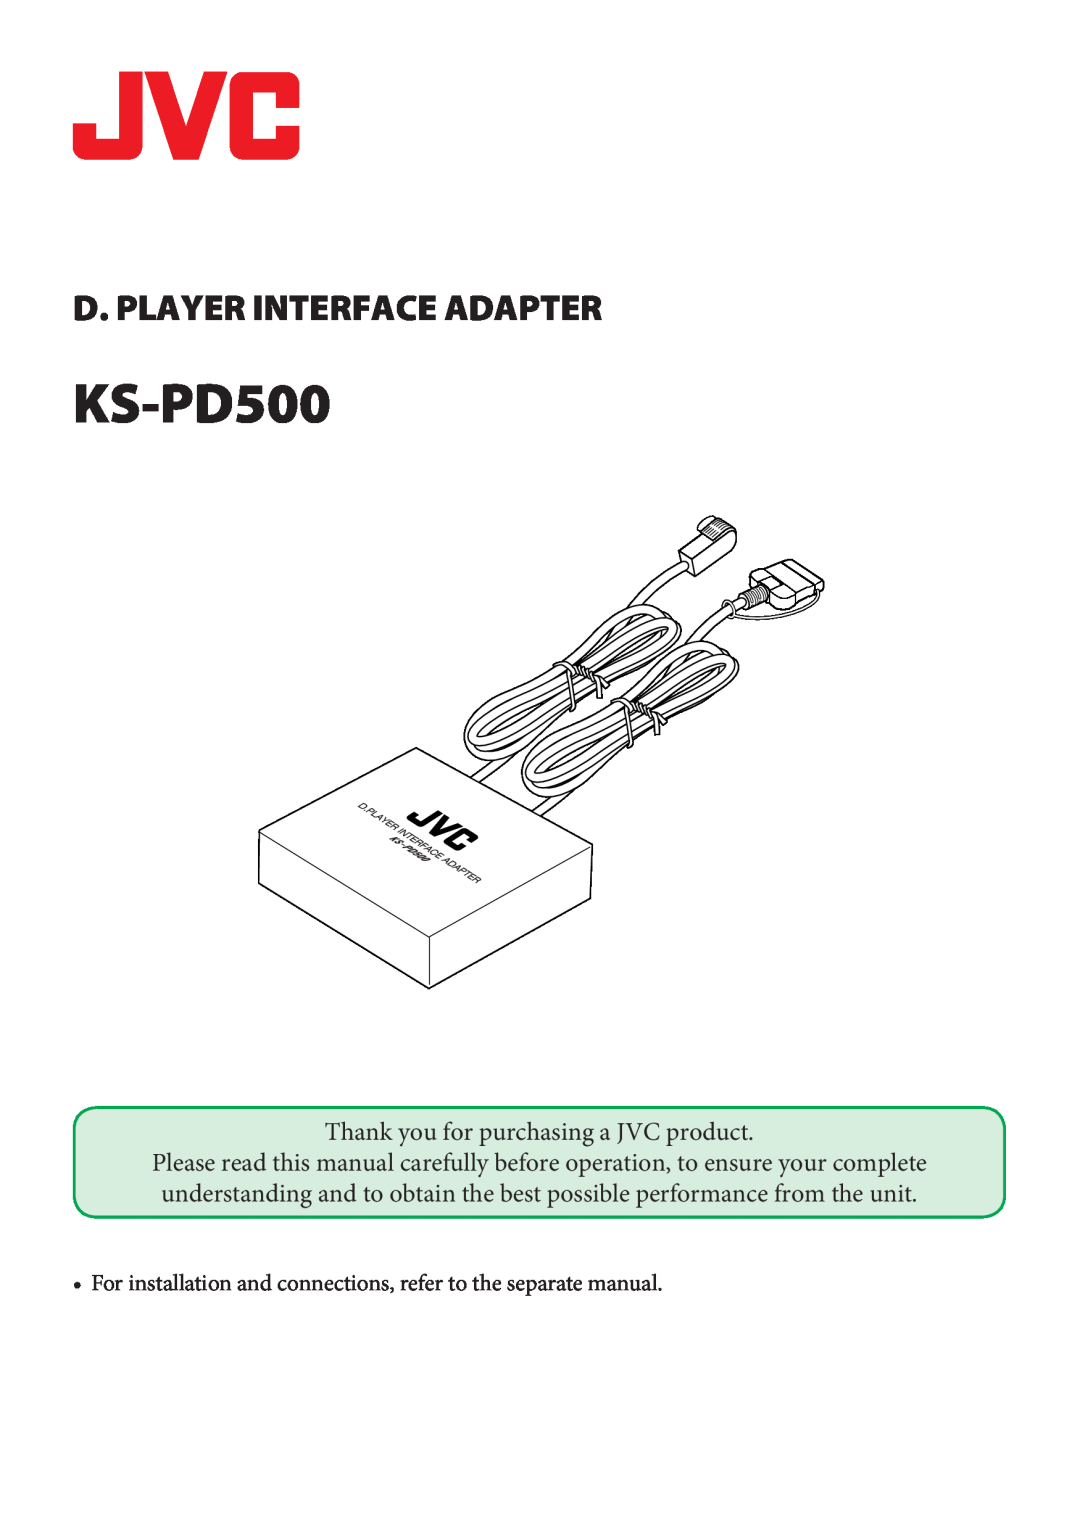 JVC KS-PD100 manual KS-PD500, D. Player Interface Adapter, Thank you for purchasing a JVC product 